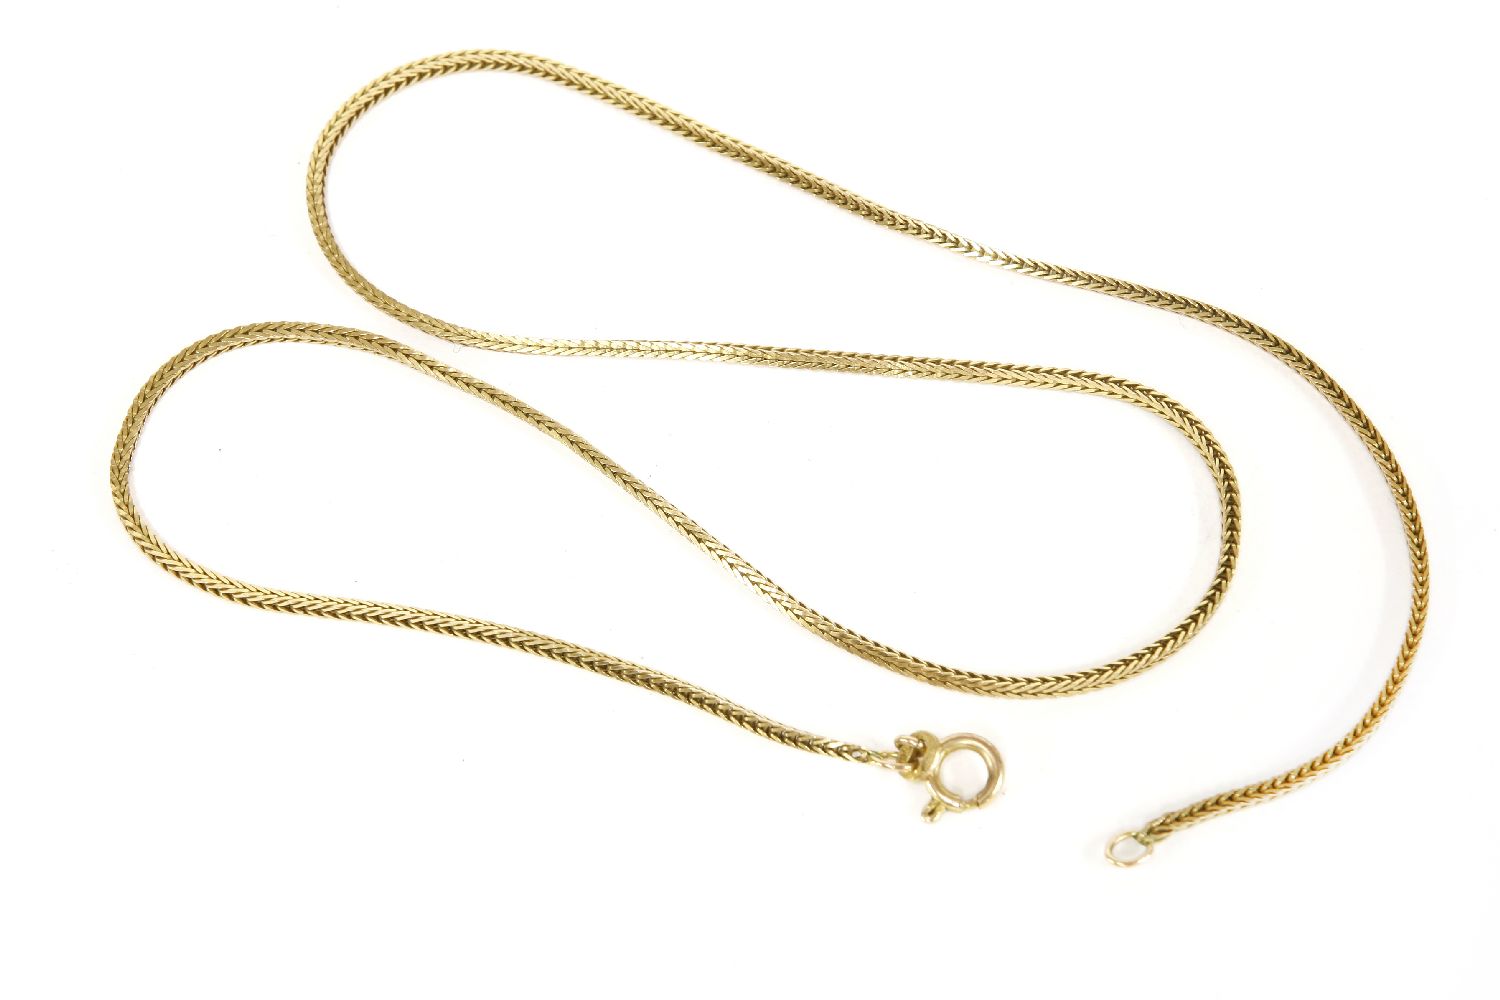 A 9ct gold foxtail chain, 6.42g